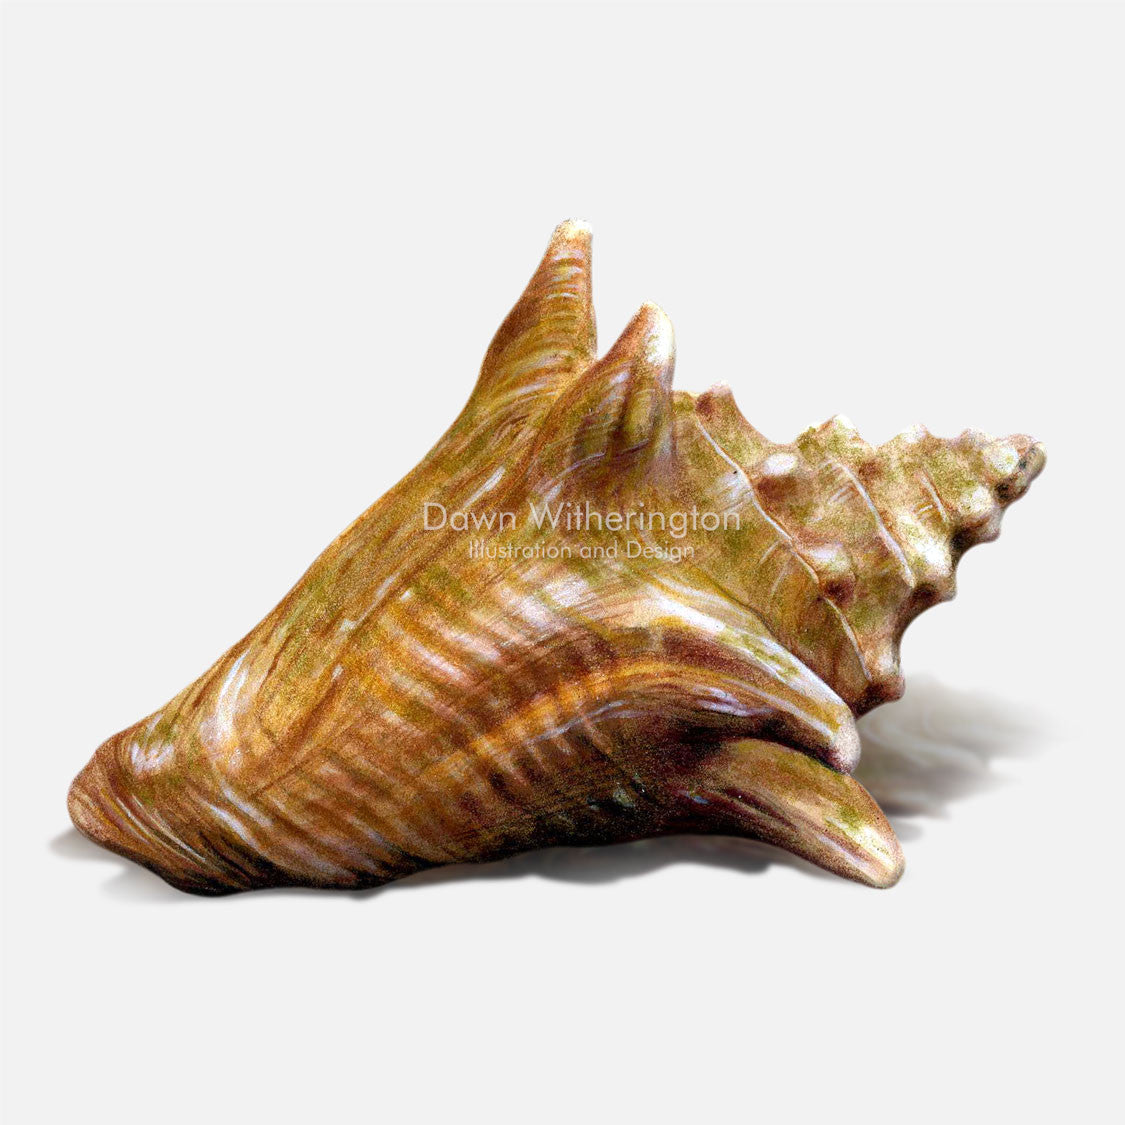 This beautiful drawing of a sub adult queen conch, Strombus gigas, is biologically accurate in detail.